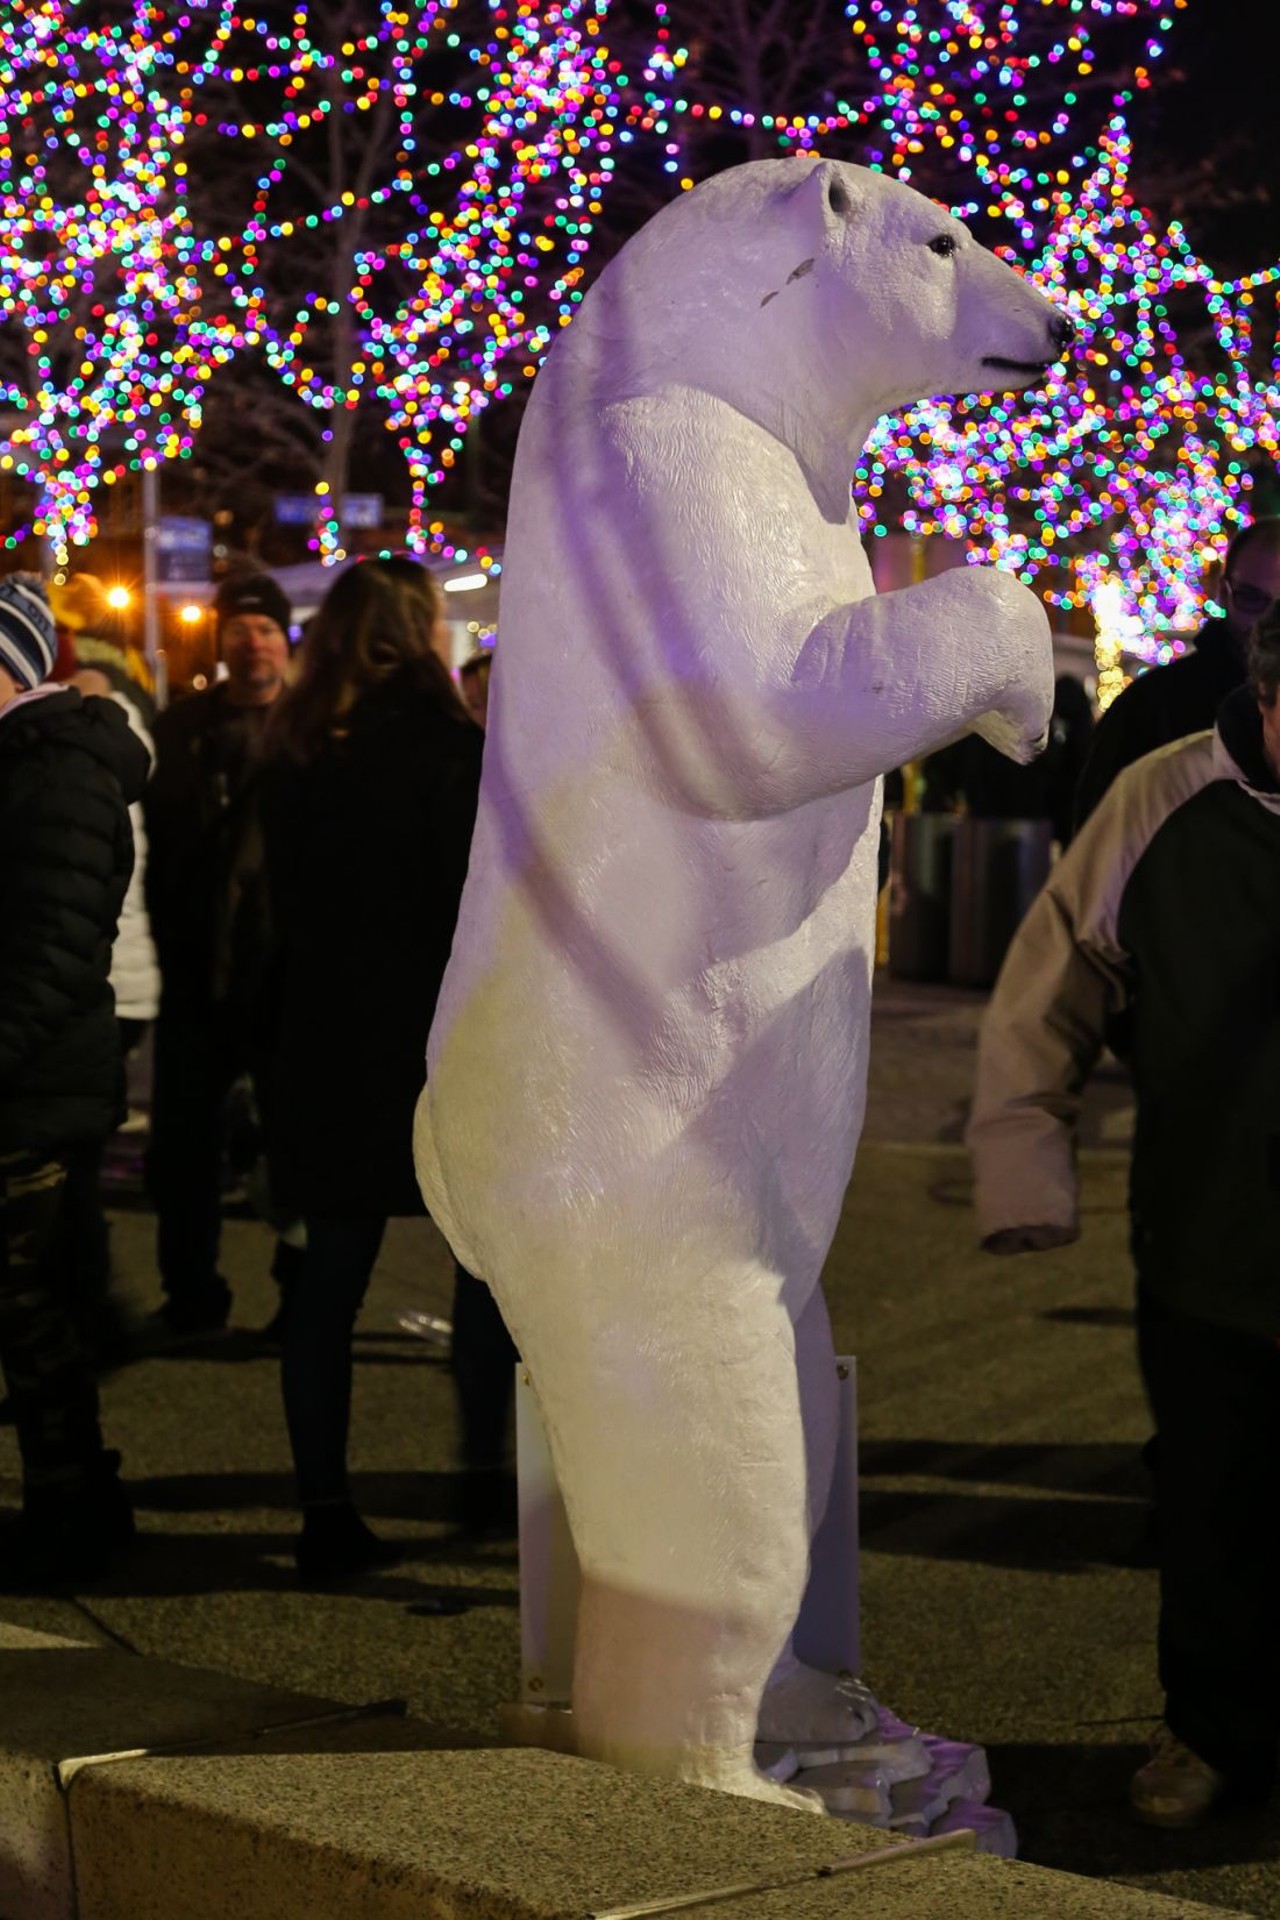 All the Festive Photos From Winterfest 2019 on Public Square